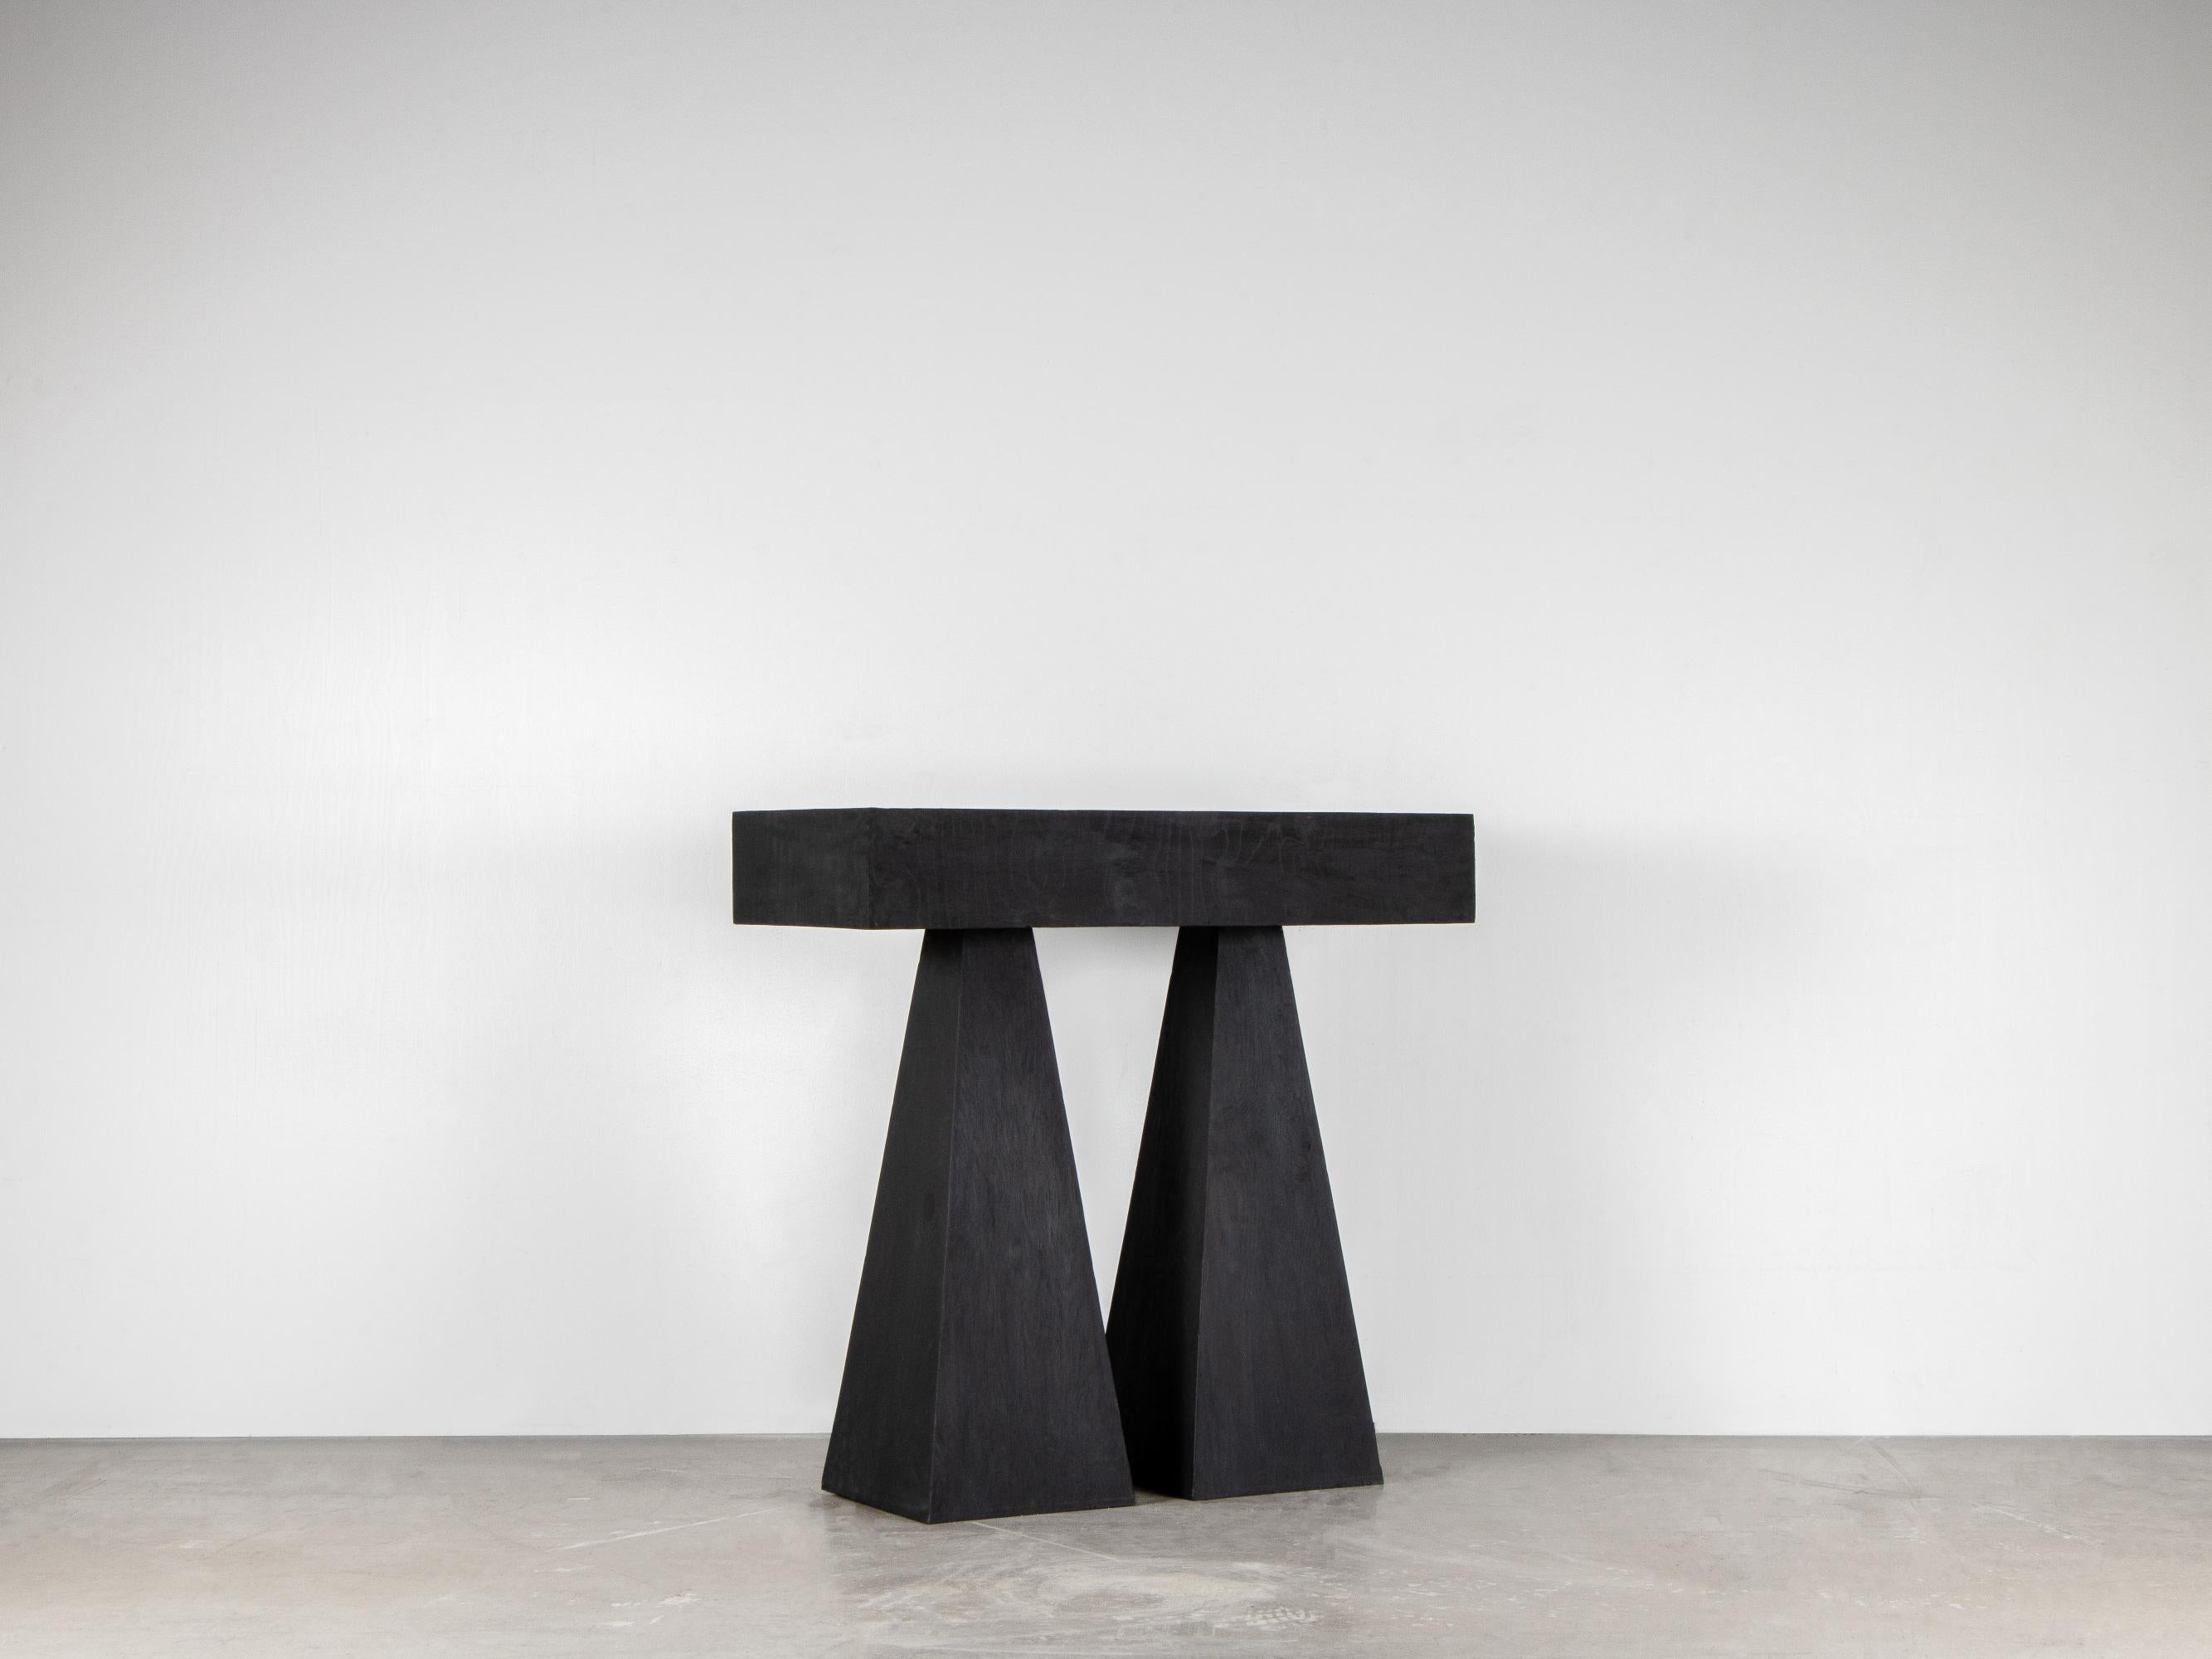 Torn high console table by Lucas Tyra Morten
2018
Limited Edition of 29
Dimensions: W 90.5, H 89, D 40
Material: handwaxed plywood

Torn table with its two individual legs symbolizes the constant struggle to maintain the right equilibrium between